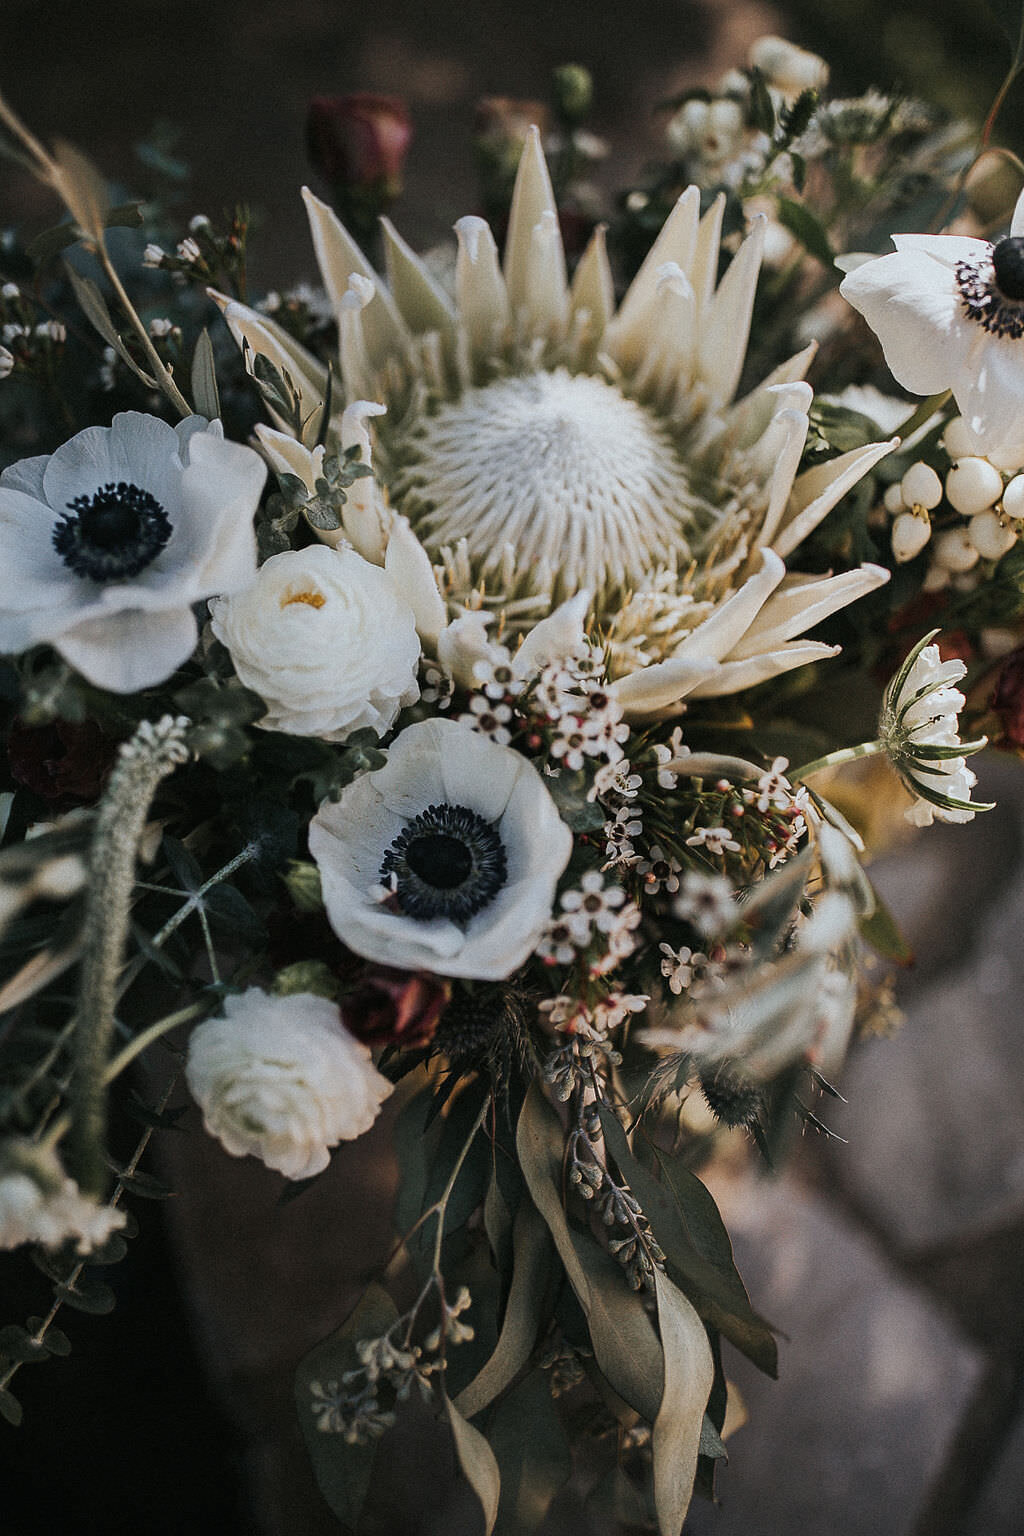 bridal bouquet white white anemone, white king protea, wax flower, ranunculus, and snowberry